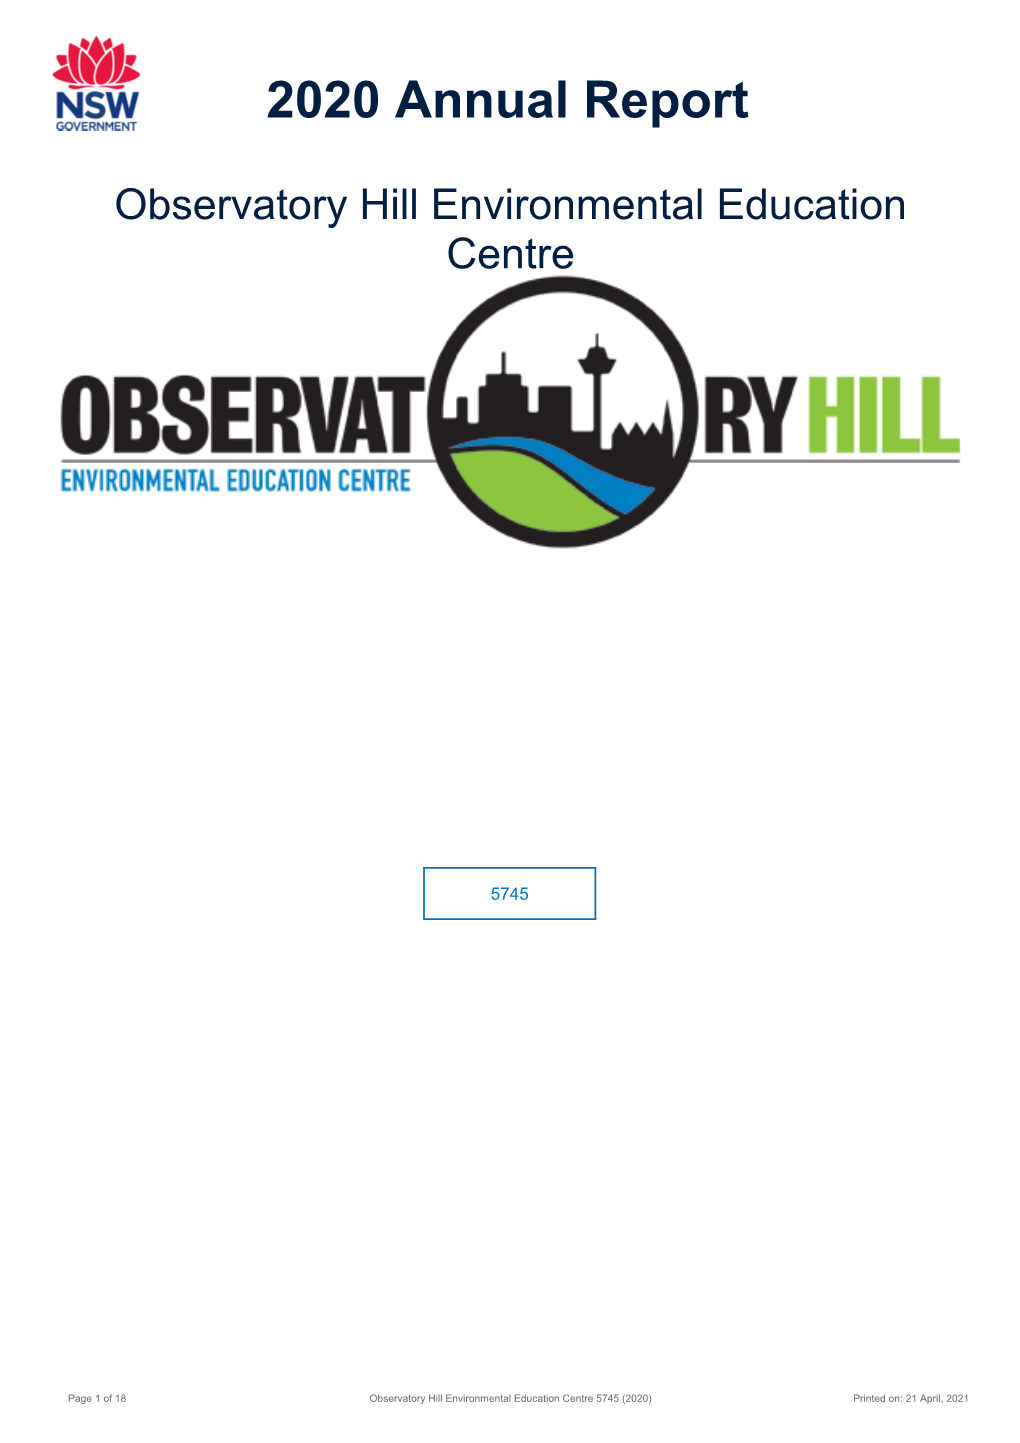 2020 Observatory Hill Environmental Education Centre Annual Report